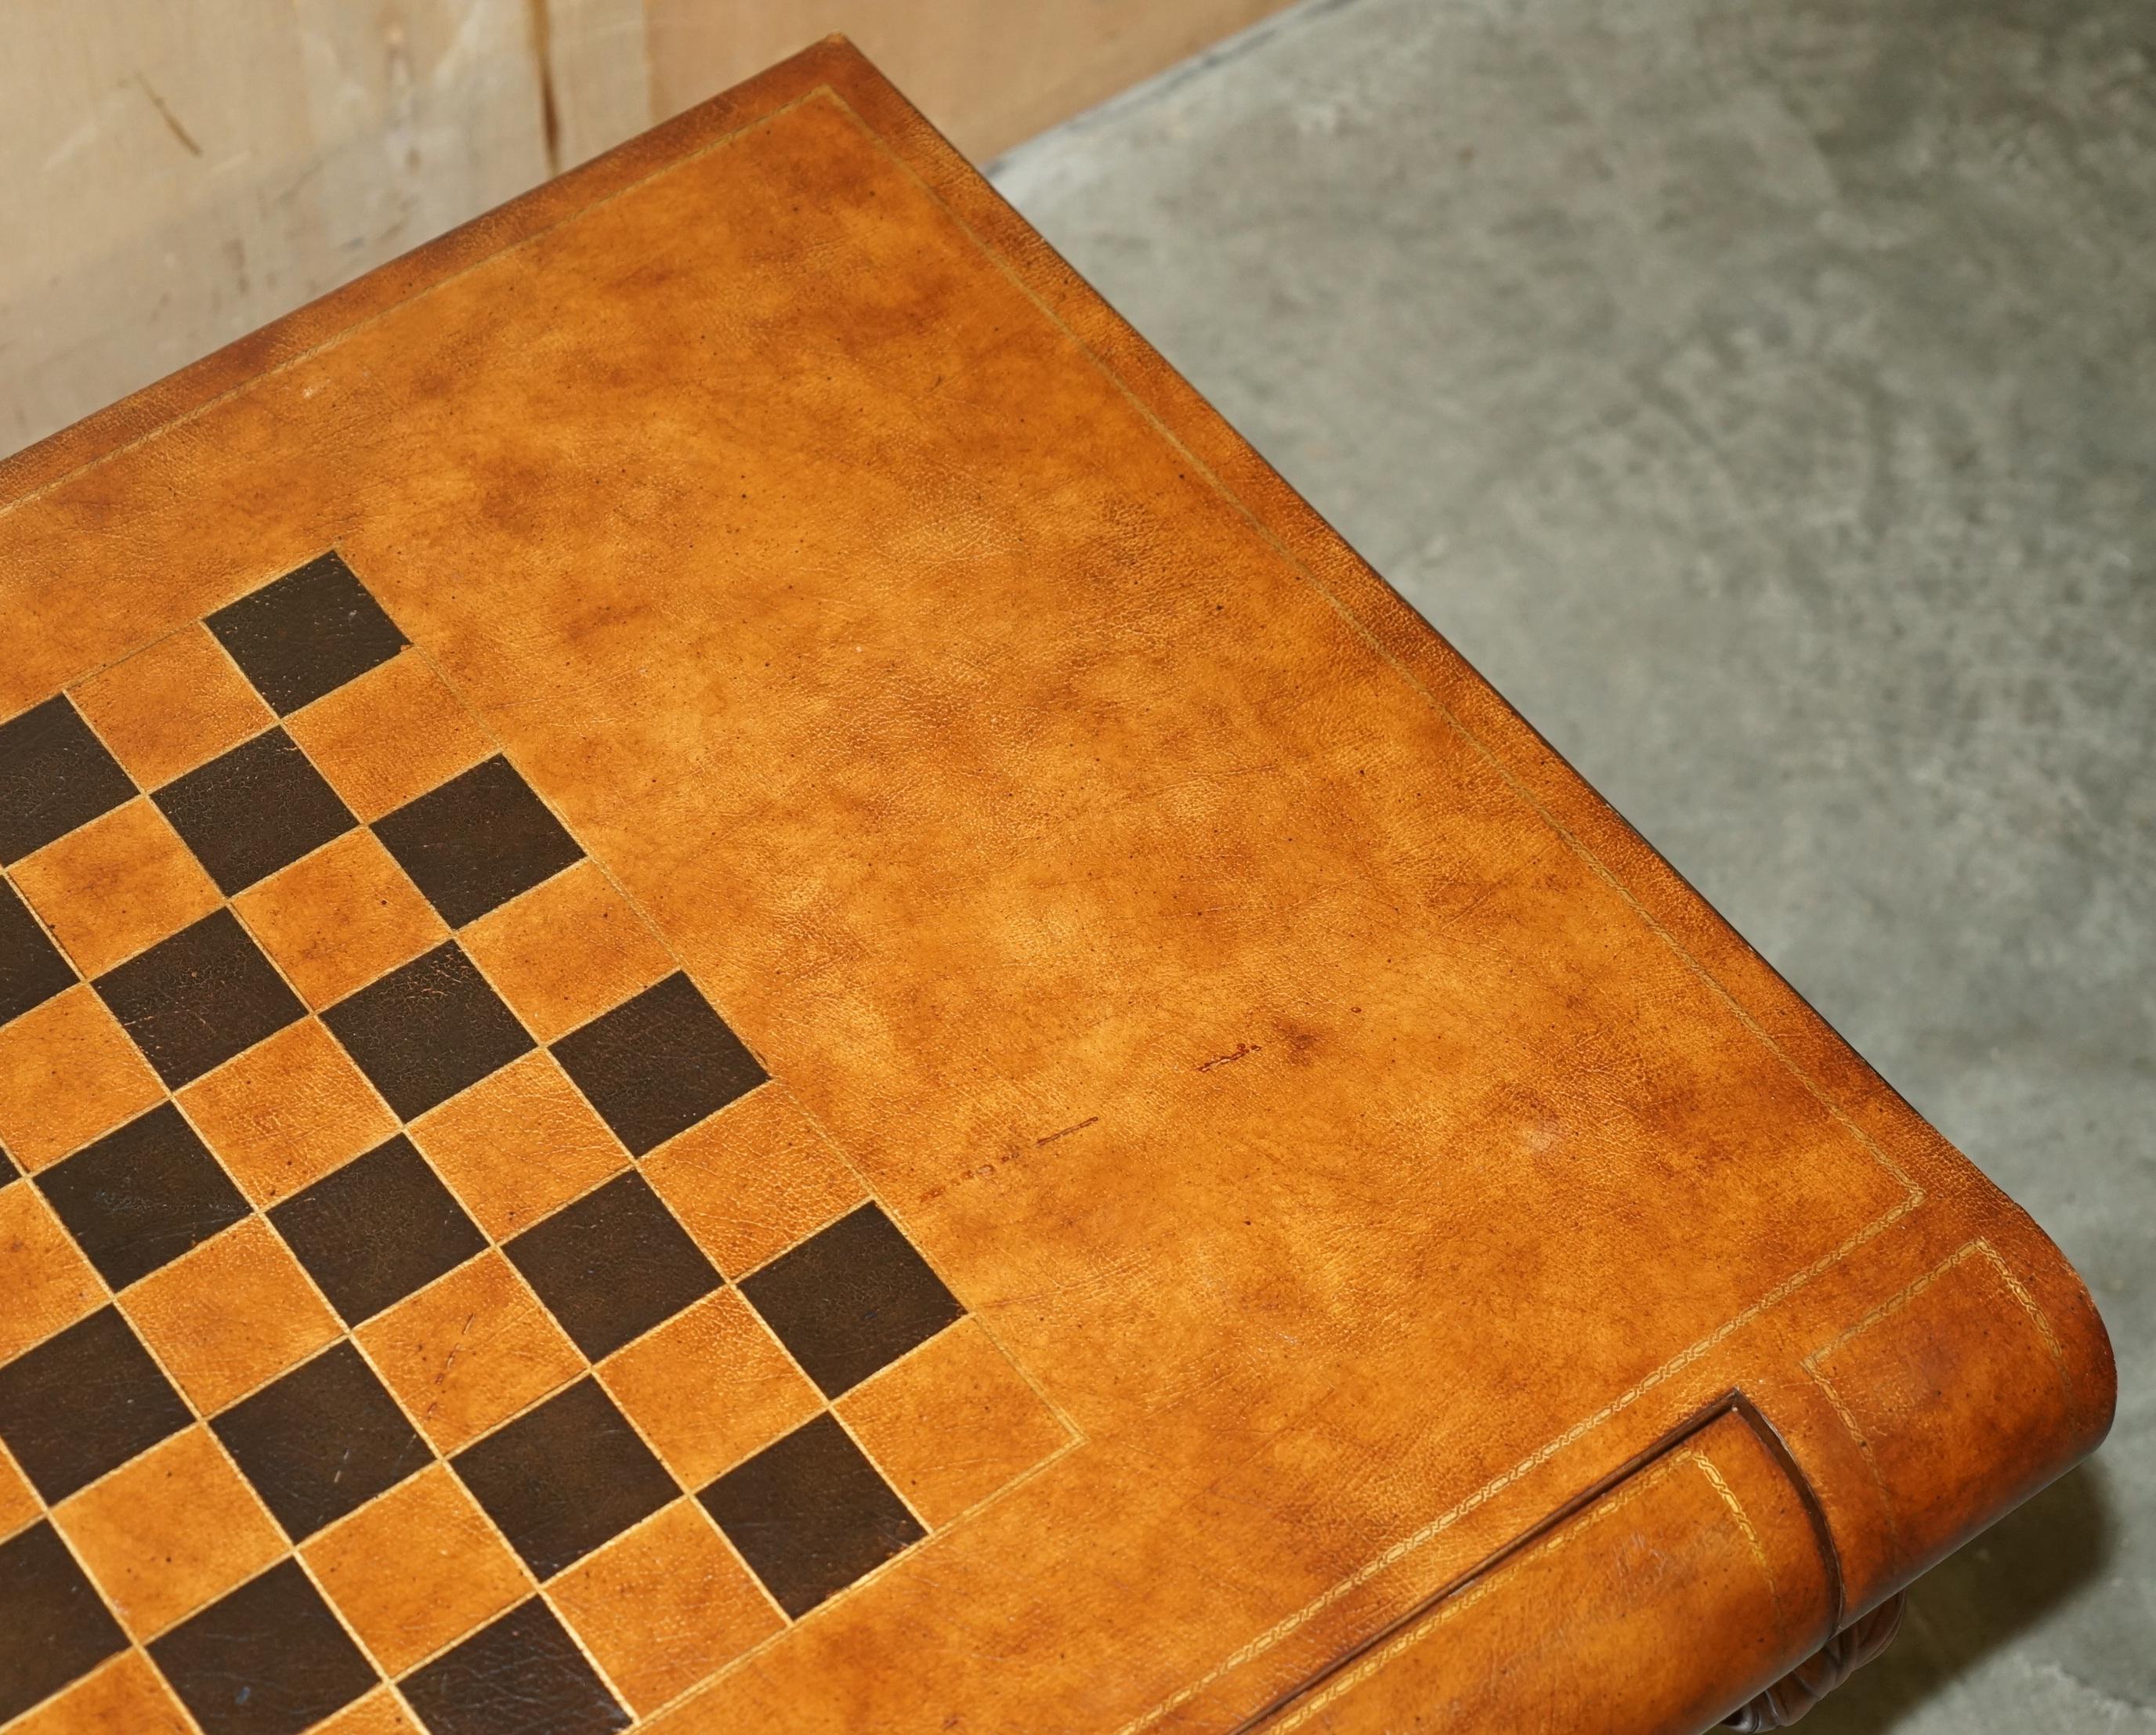 Leather STUNNiNG HAND DYED BROWN LEATHER SCHOLARS BOOK CHESSBOARD CHESS COFFEE TABLE For Sale